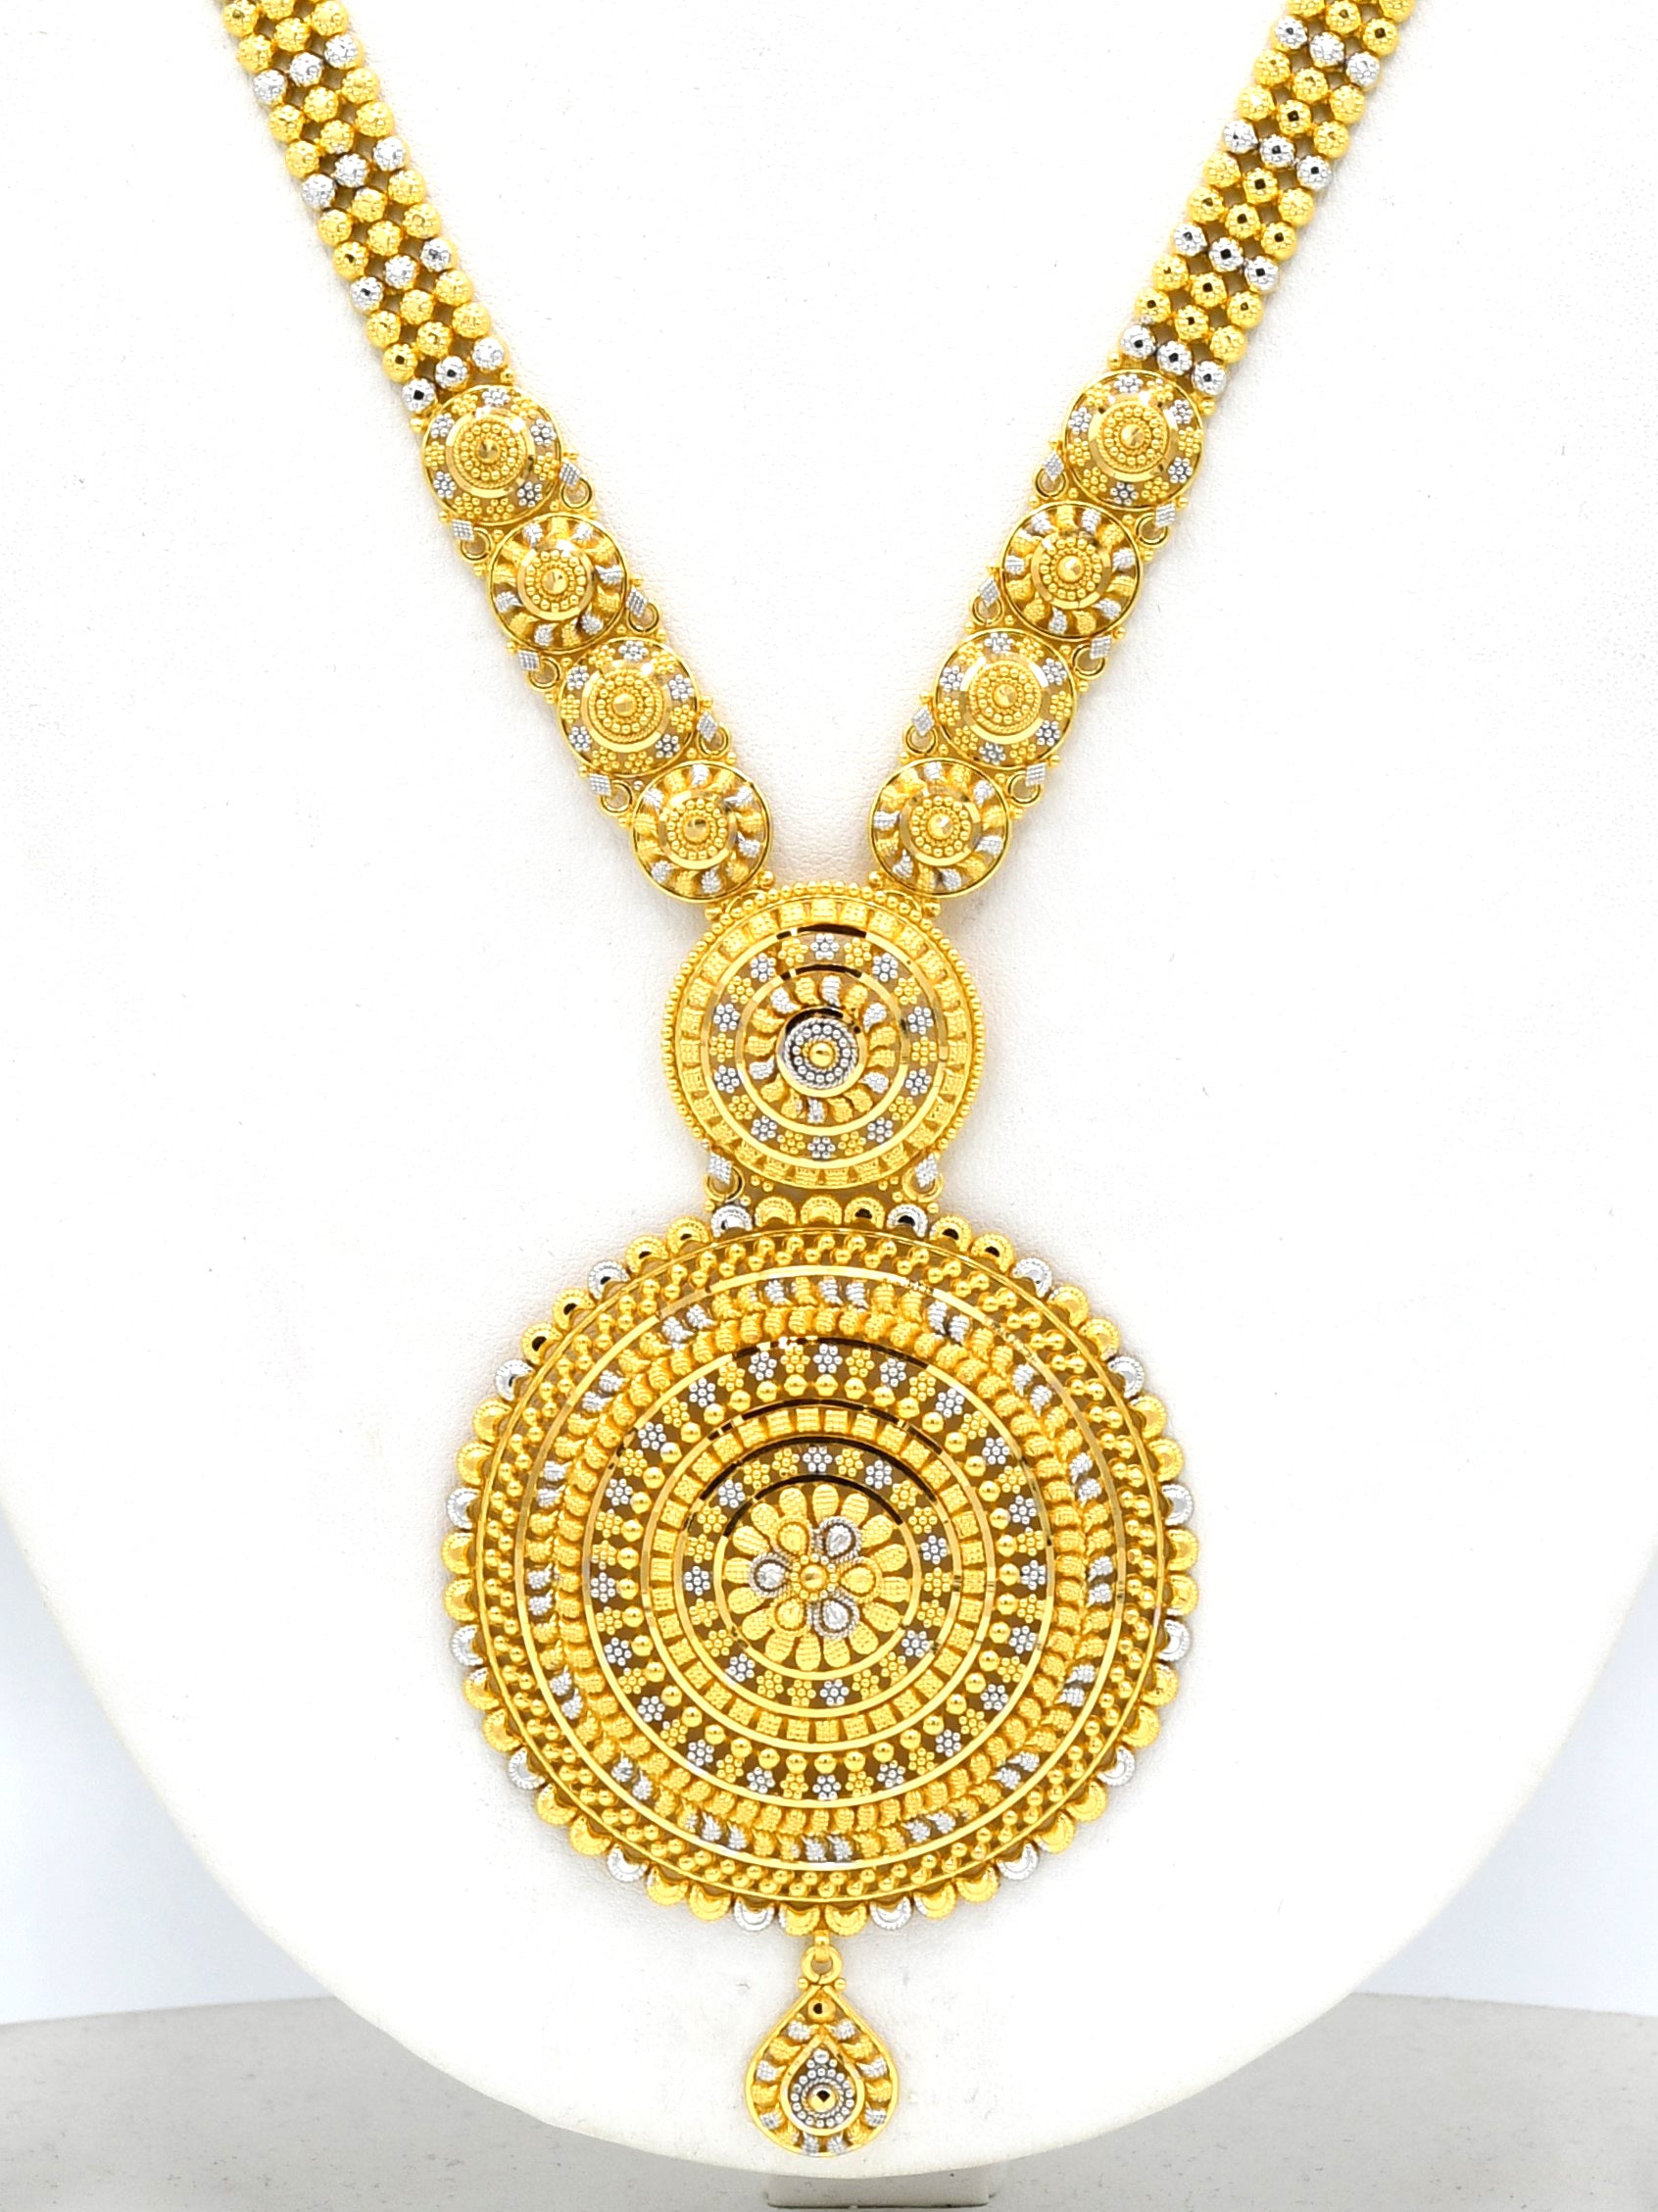 22ct Gold Filigree Two Tone Long Necklace Set - Roop Darshan